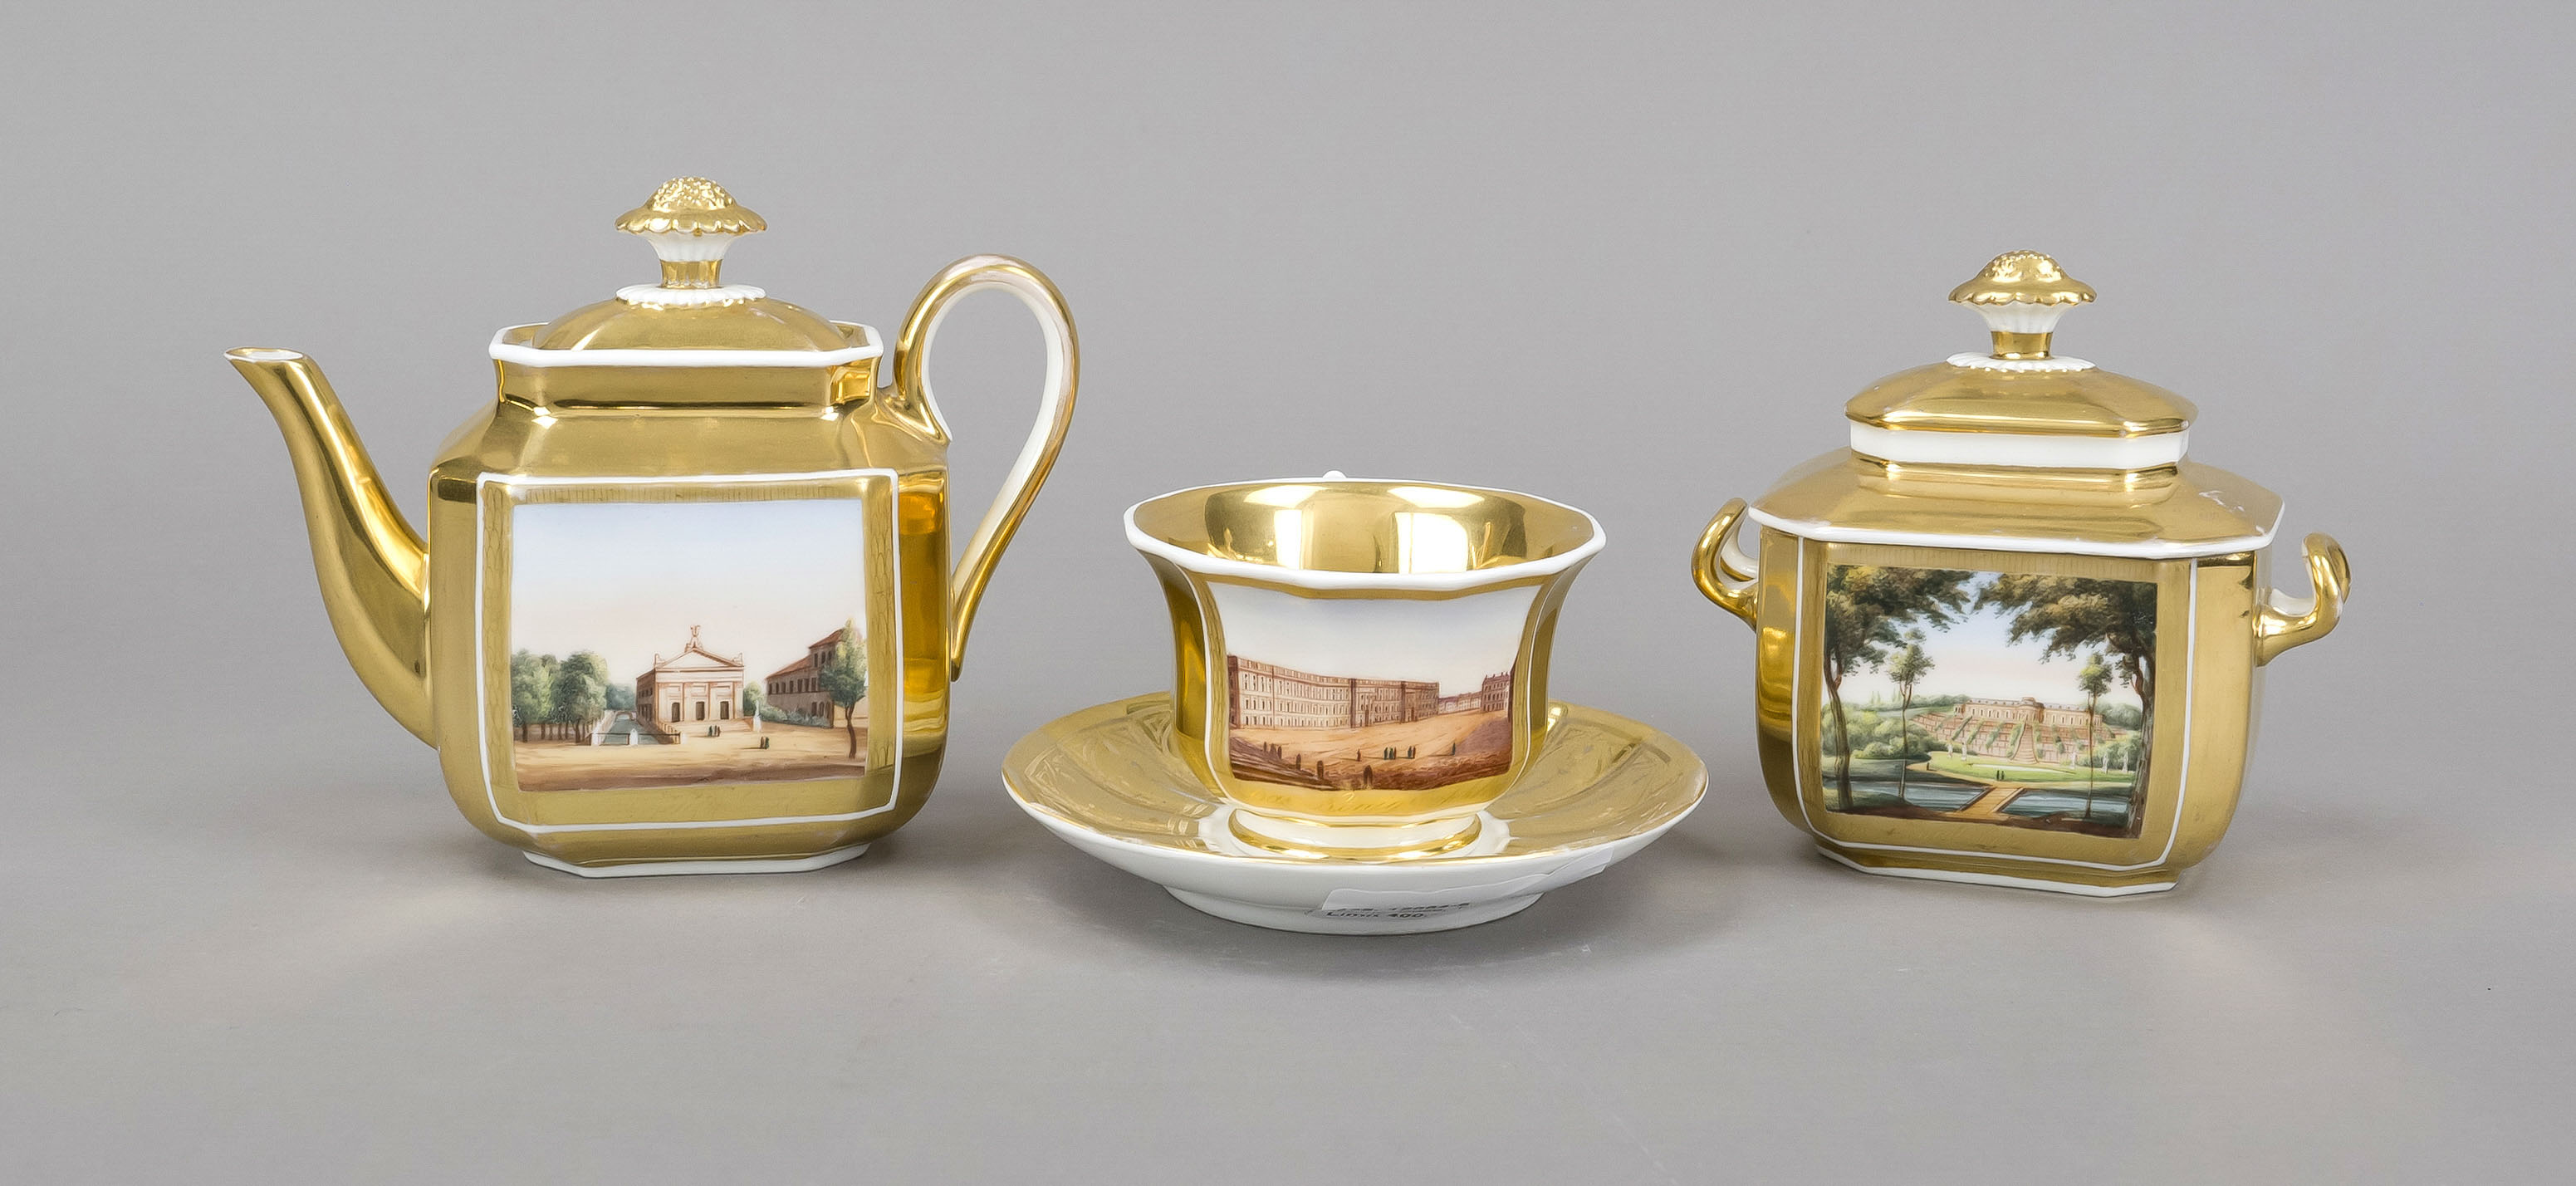 Jug, sugar bowl and view cup with saucer, early 19th century, w. France, polychrome painting in